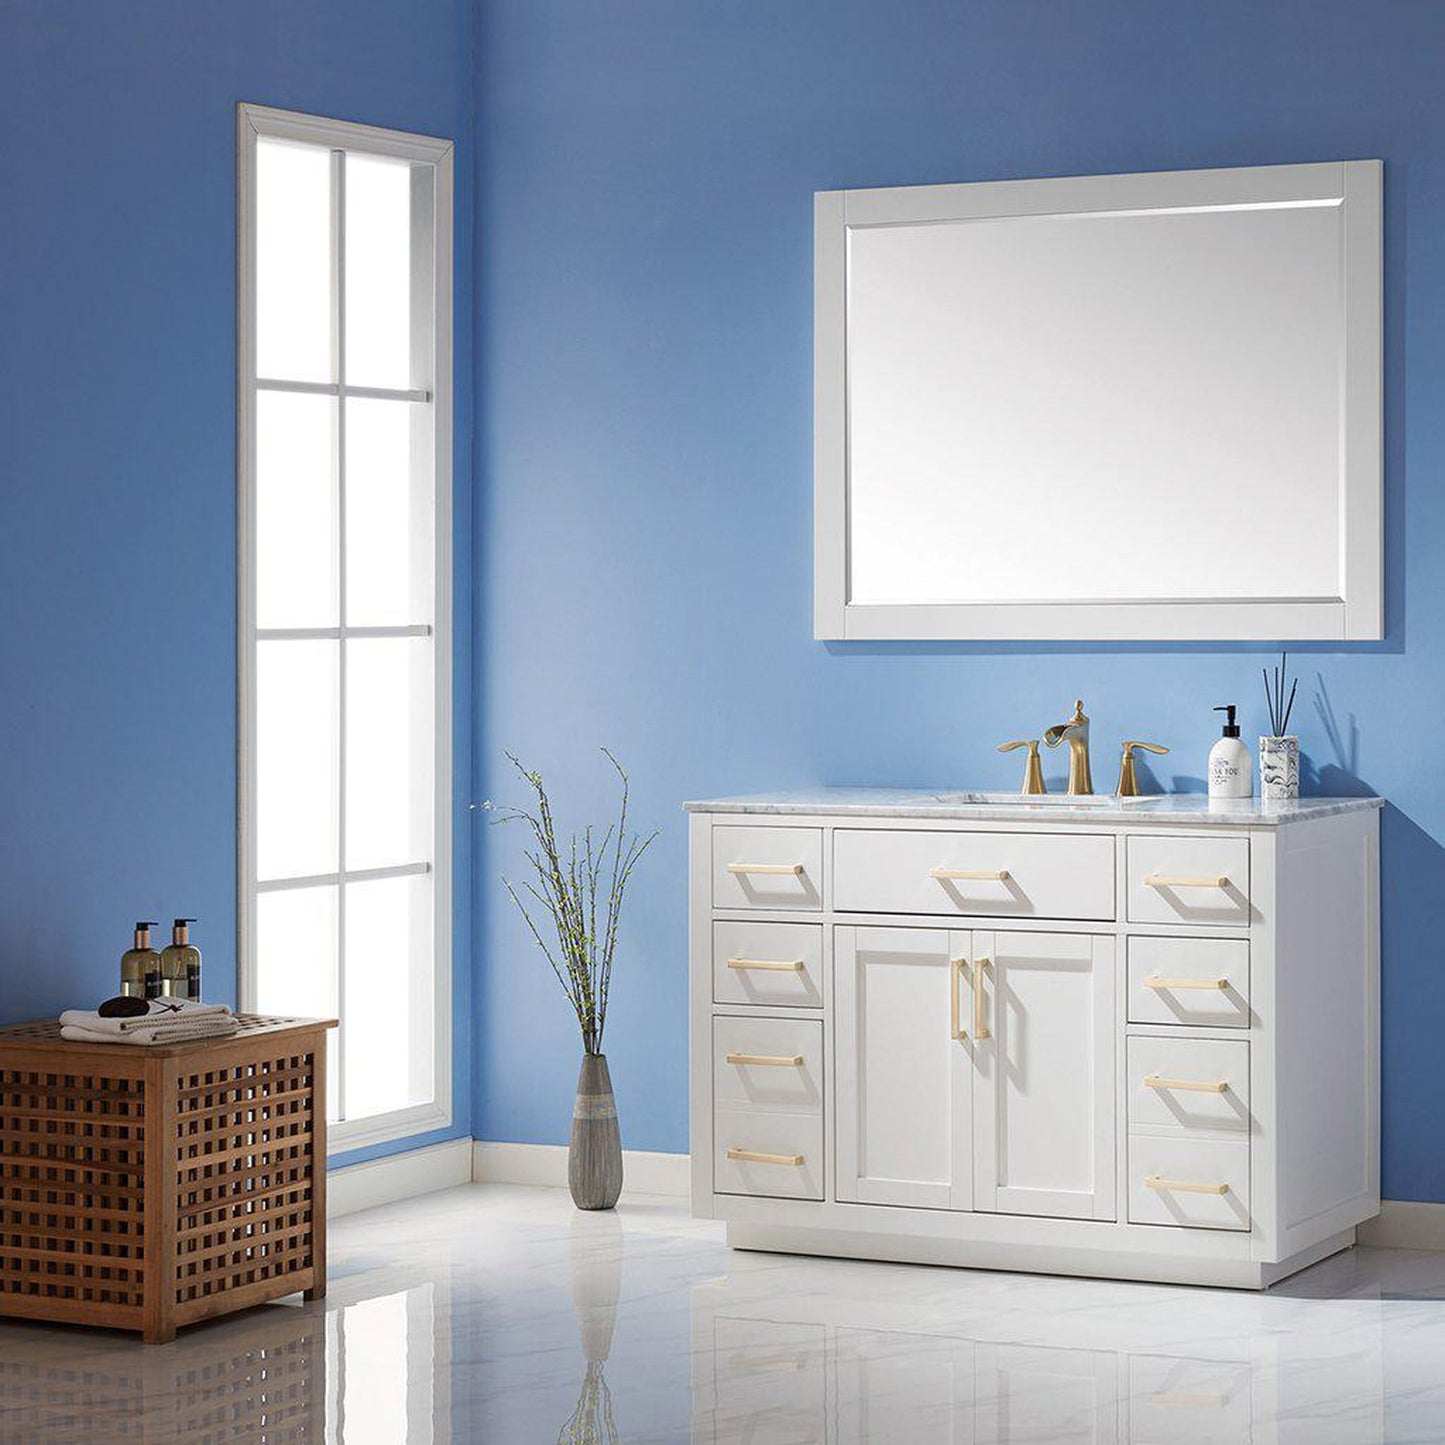 Altair Ivy 48" Single White Freestanding Bathroom Vanity Set With Mirror, Natural Carrara White Marble Top, Rectangular Undermount Ceramic Sink, and Overflow